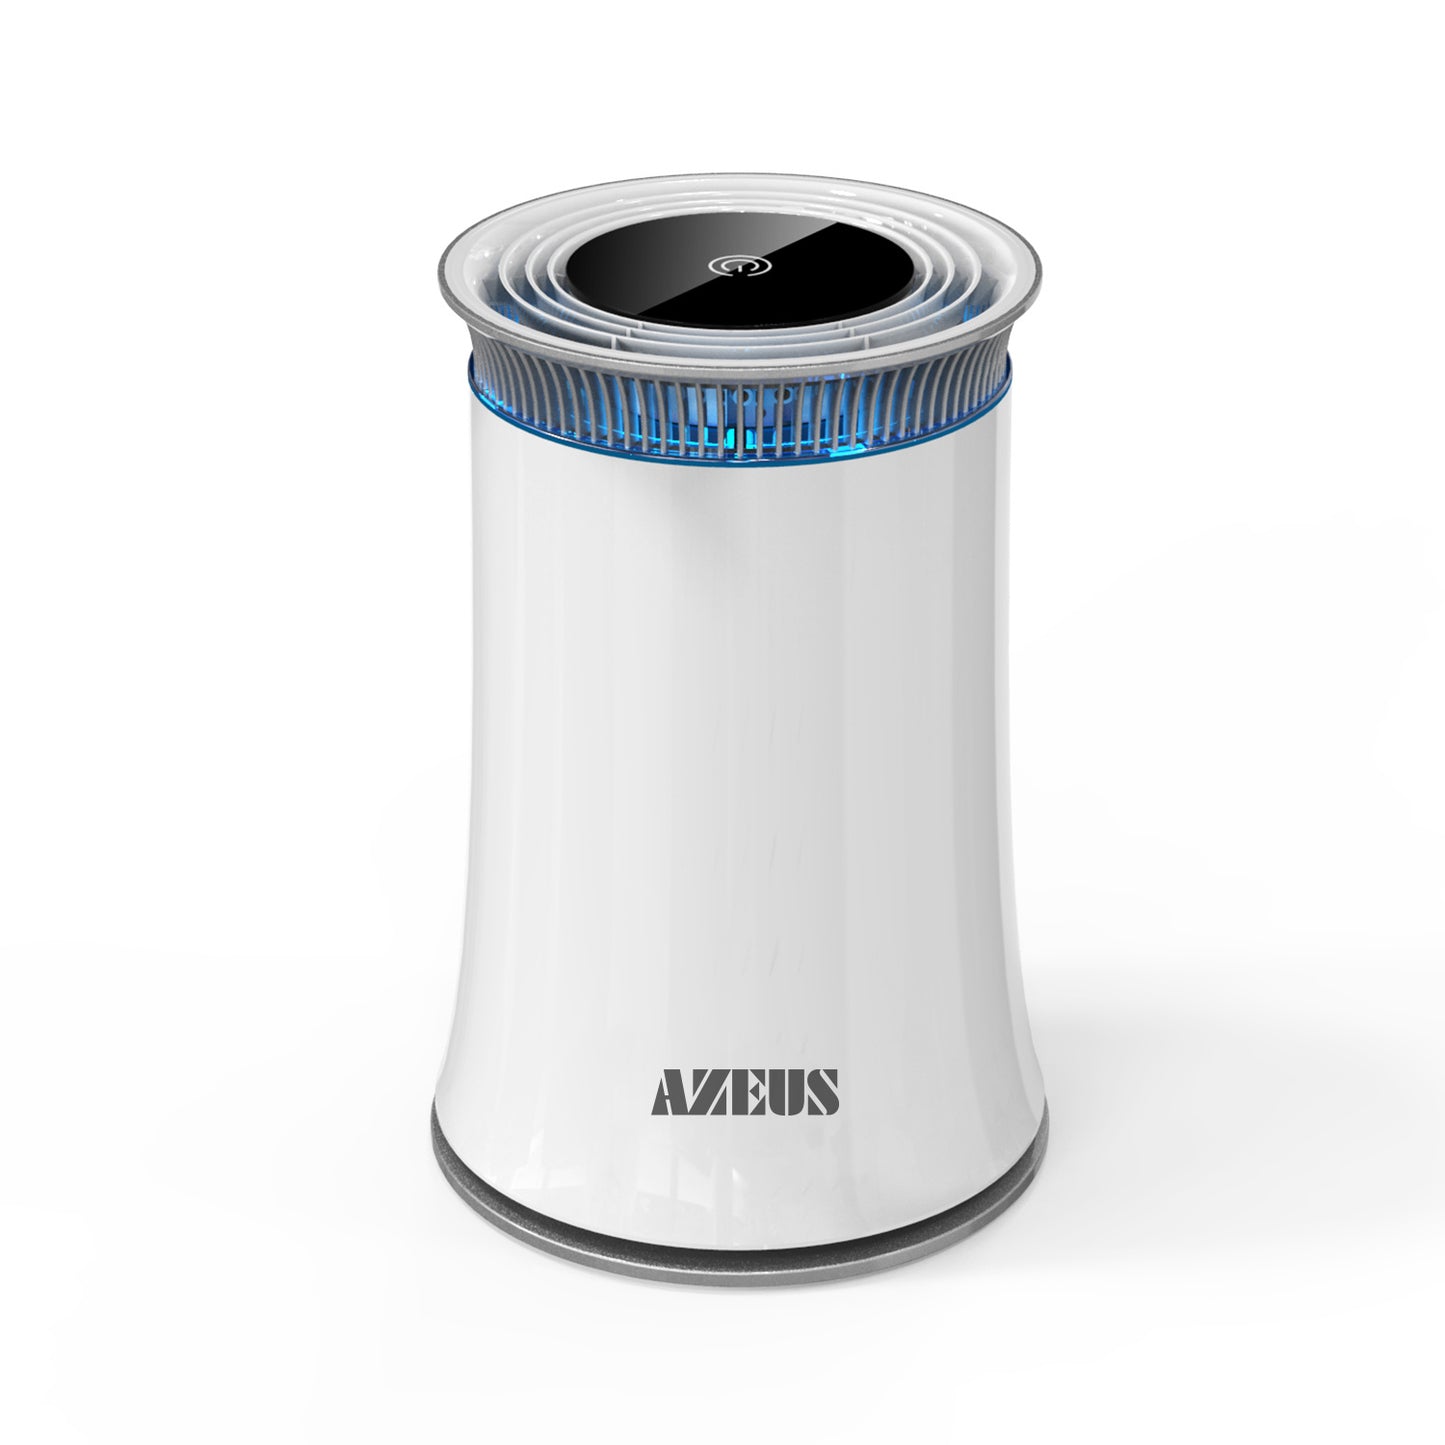 AZEUS KJ120G-C10  High CADR Air Purifier, up to 376ft2, Quiet, Ozone-Free